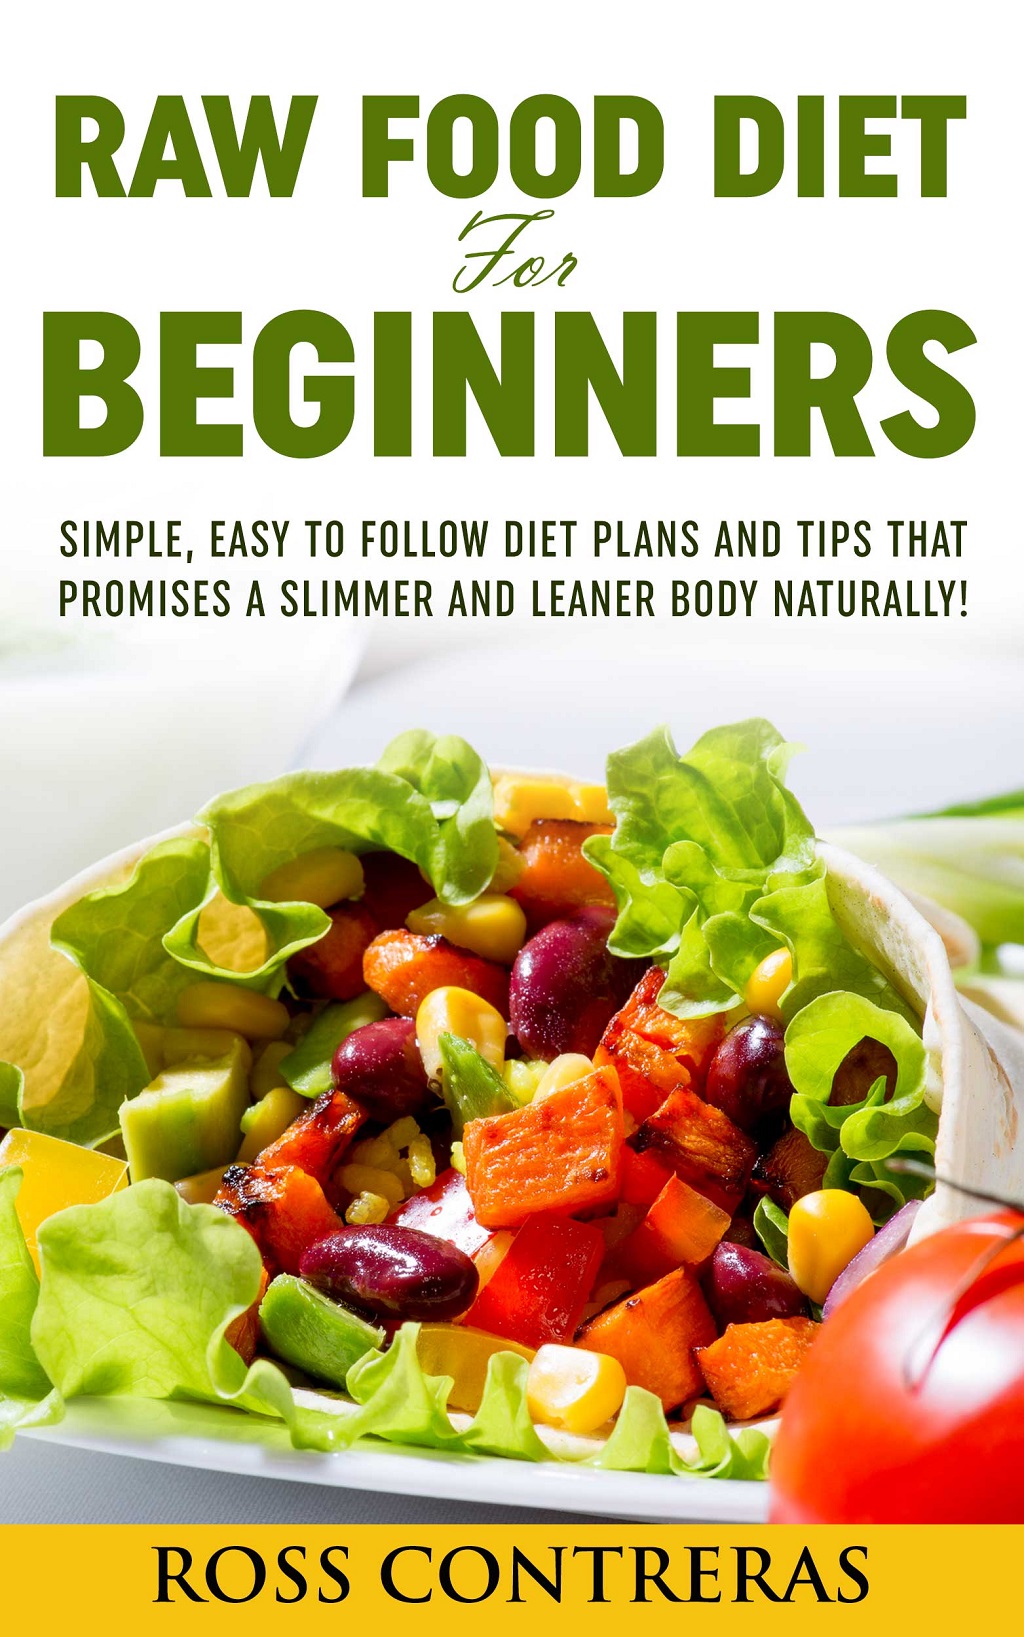 FREE: Raw Food Diet For Beginners by Ross Contreras